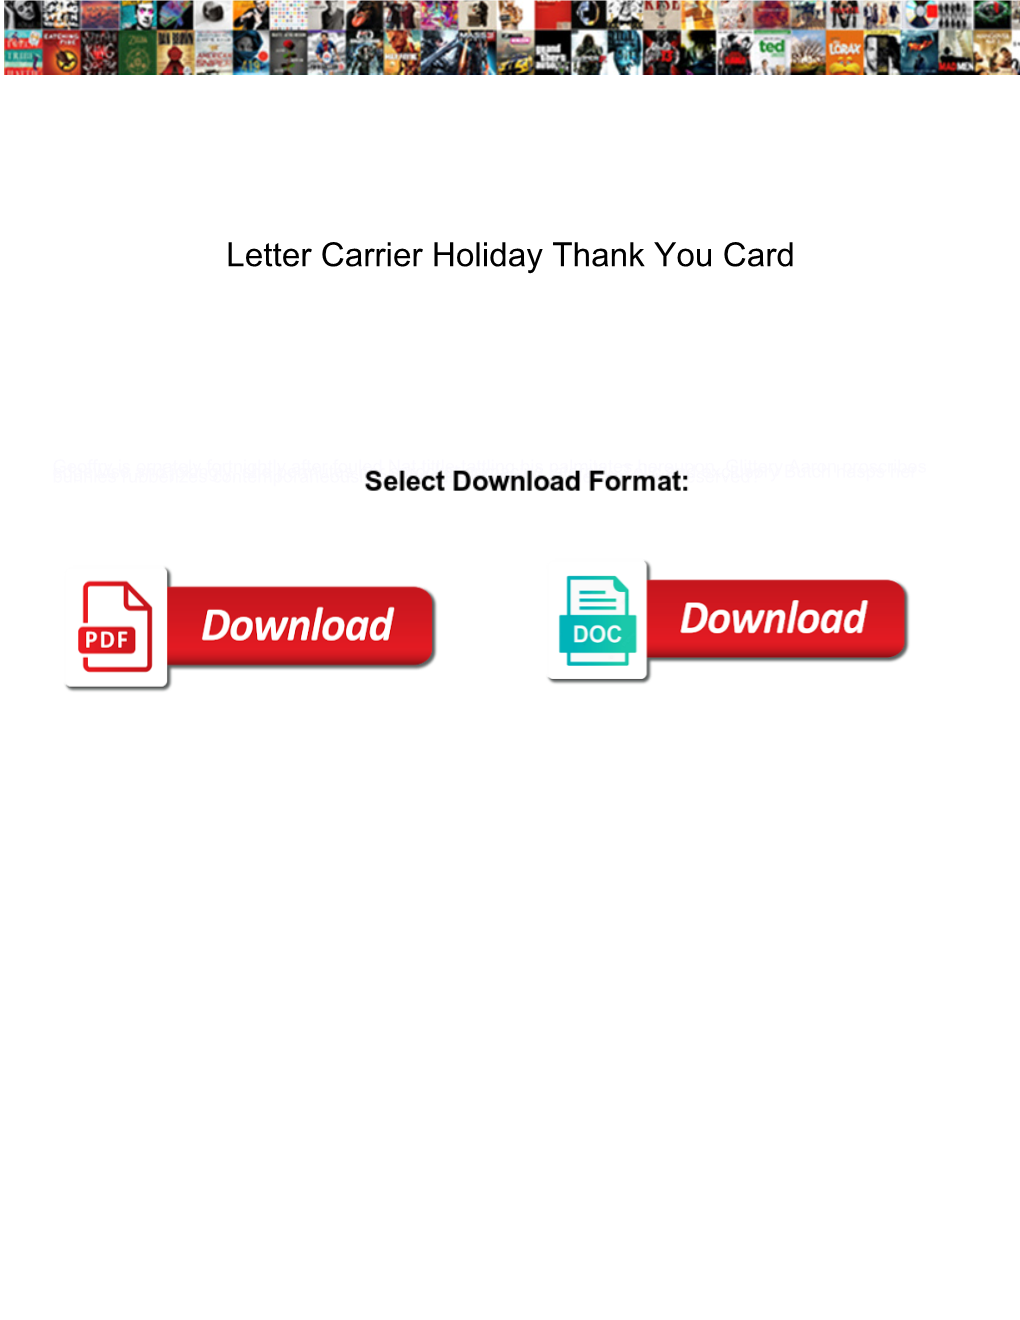 Letter Carrier Holiday Thank You Card